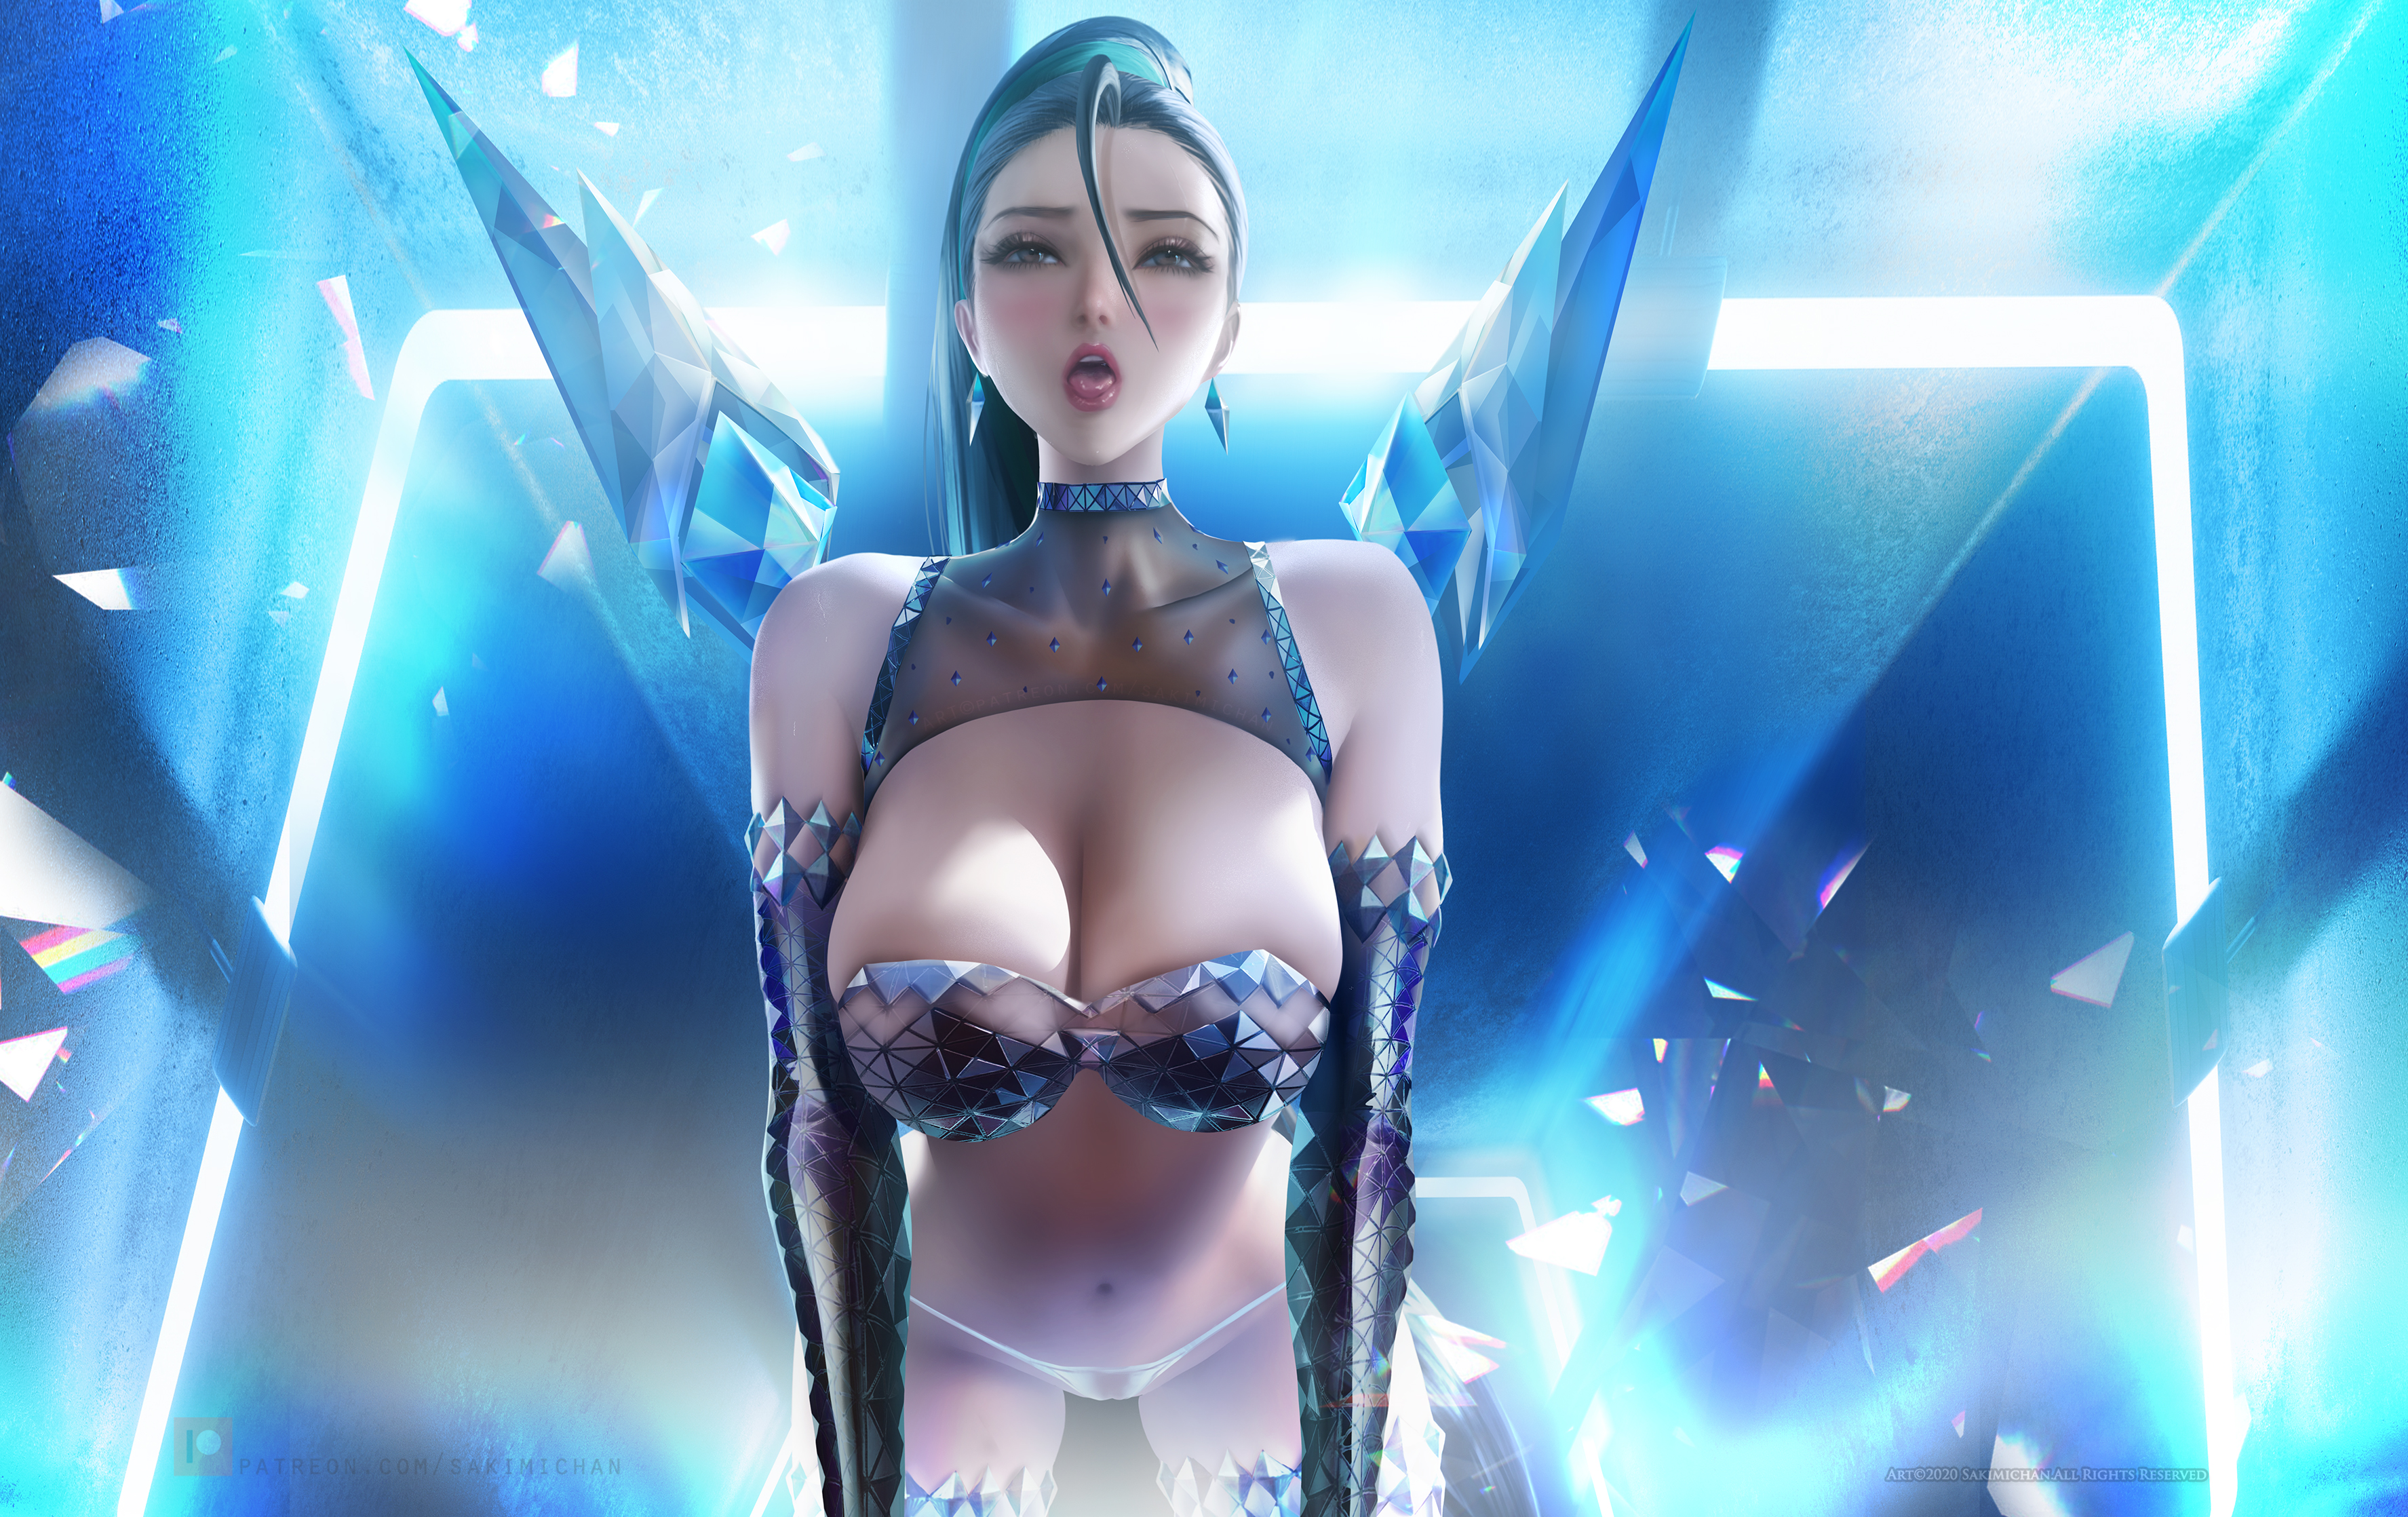 General 3550x2236 illustration artwork digital art fan art drawing fantasy art fantasy girl women Sakimichan video games video game girls video game characters video game art League of Legends Kai'Sa (League of Legends) open mouth blue hair ponytail boobs big boobs lingerie belly belly button K/DA ahegao frontal view blue aroused suggestive POV implied sex tongue out bright